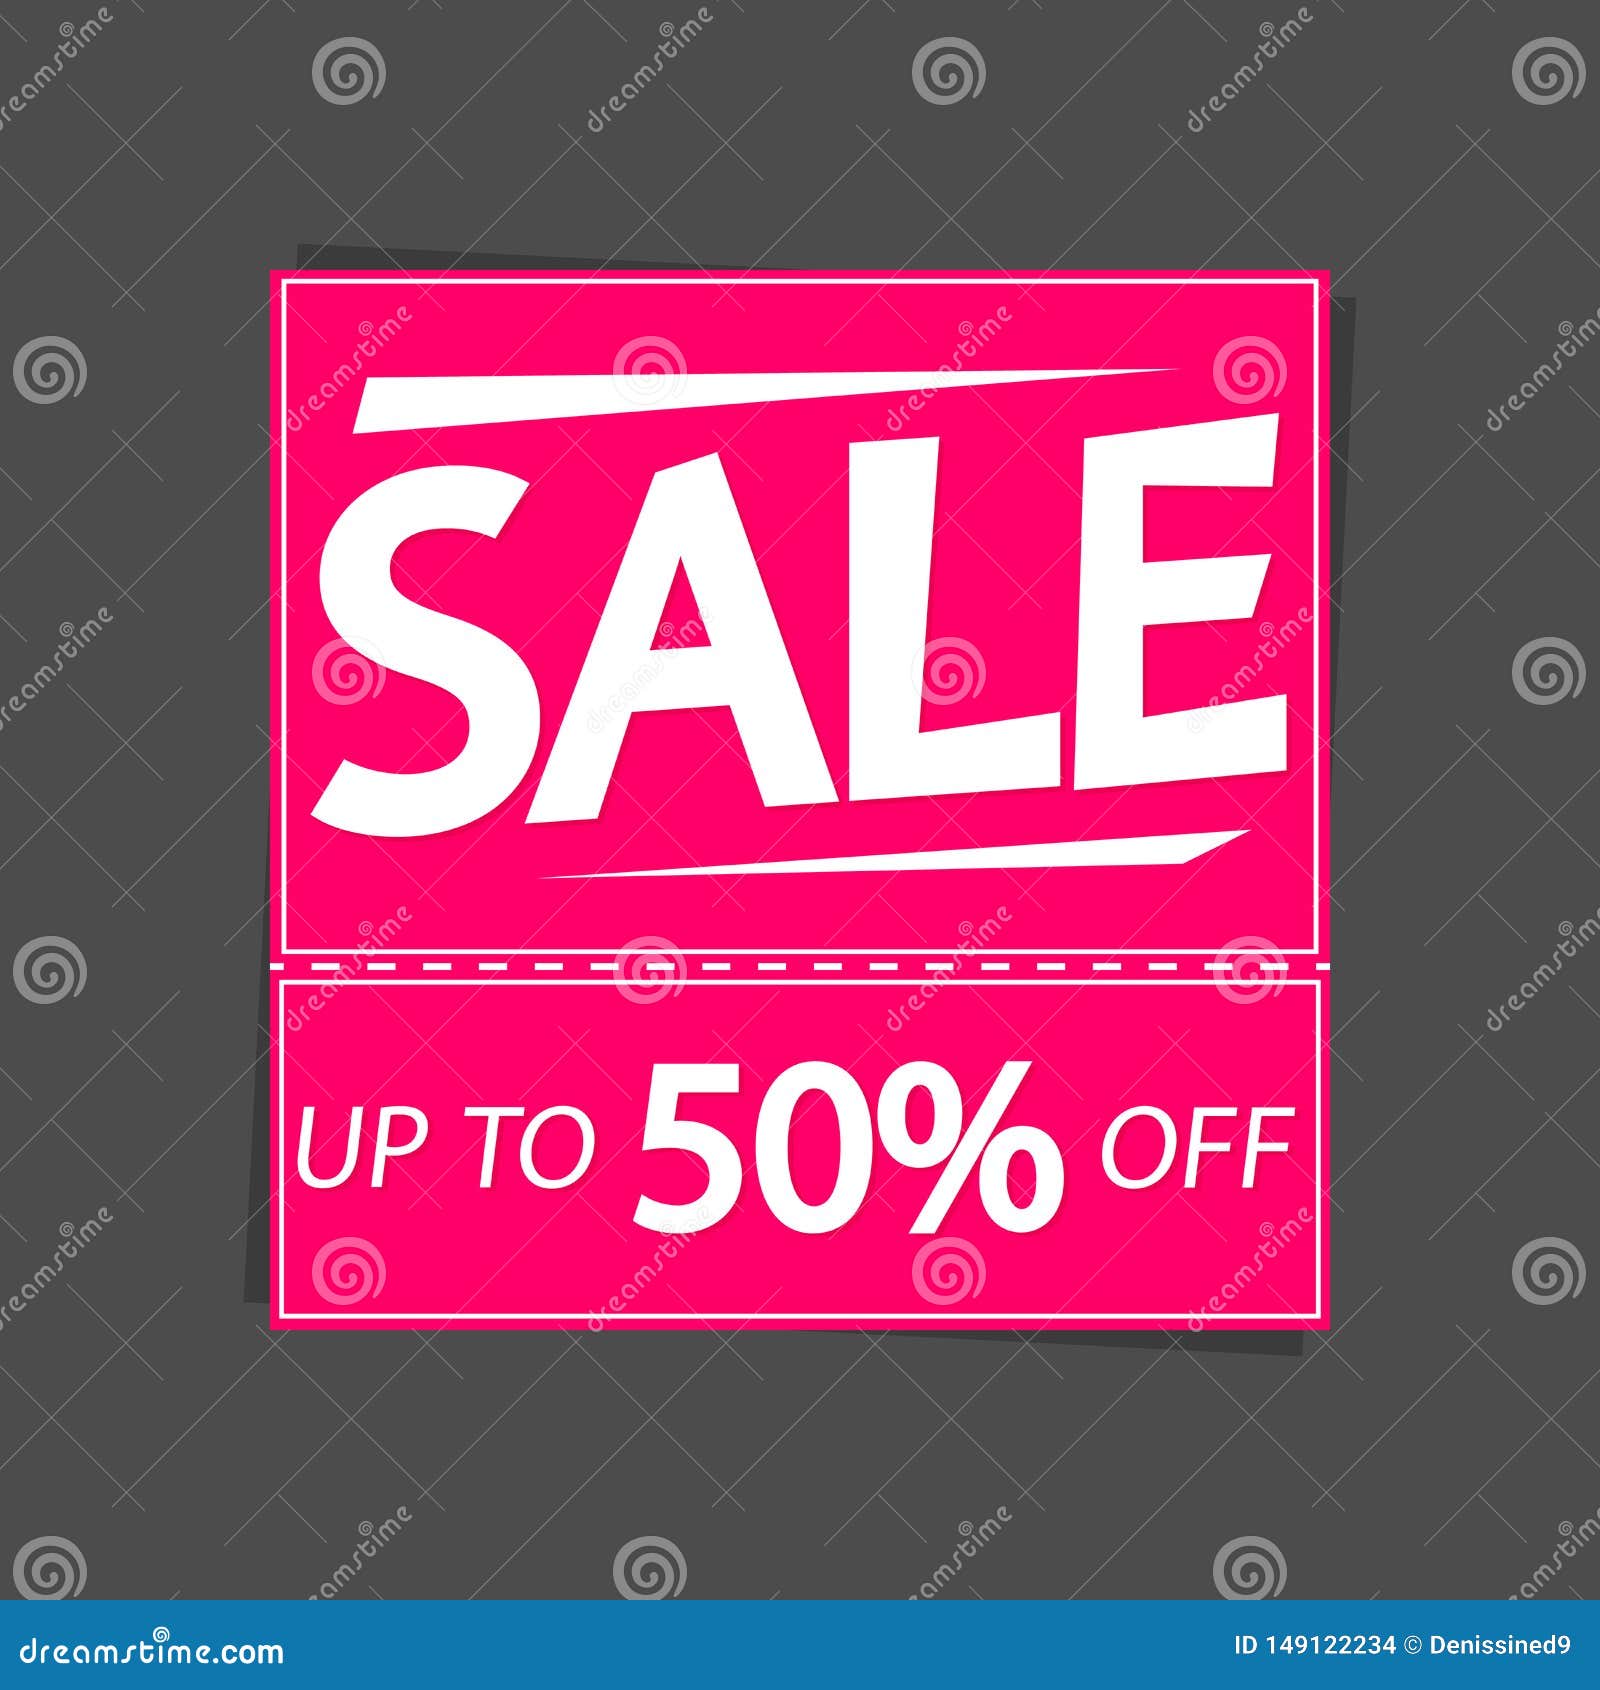 Sale Up To 50 Off Tag, Discount Banner Design Template, Vector ...